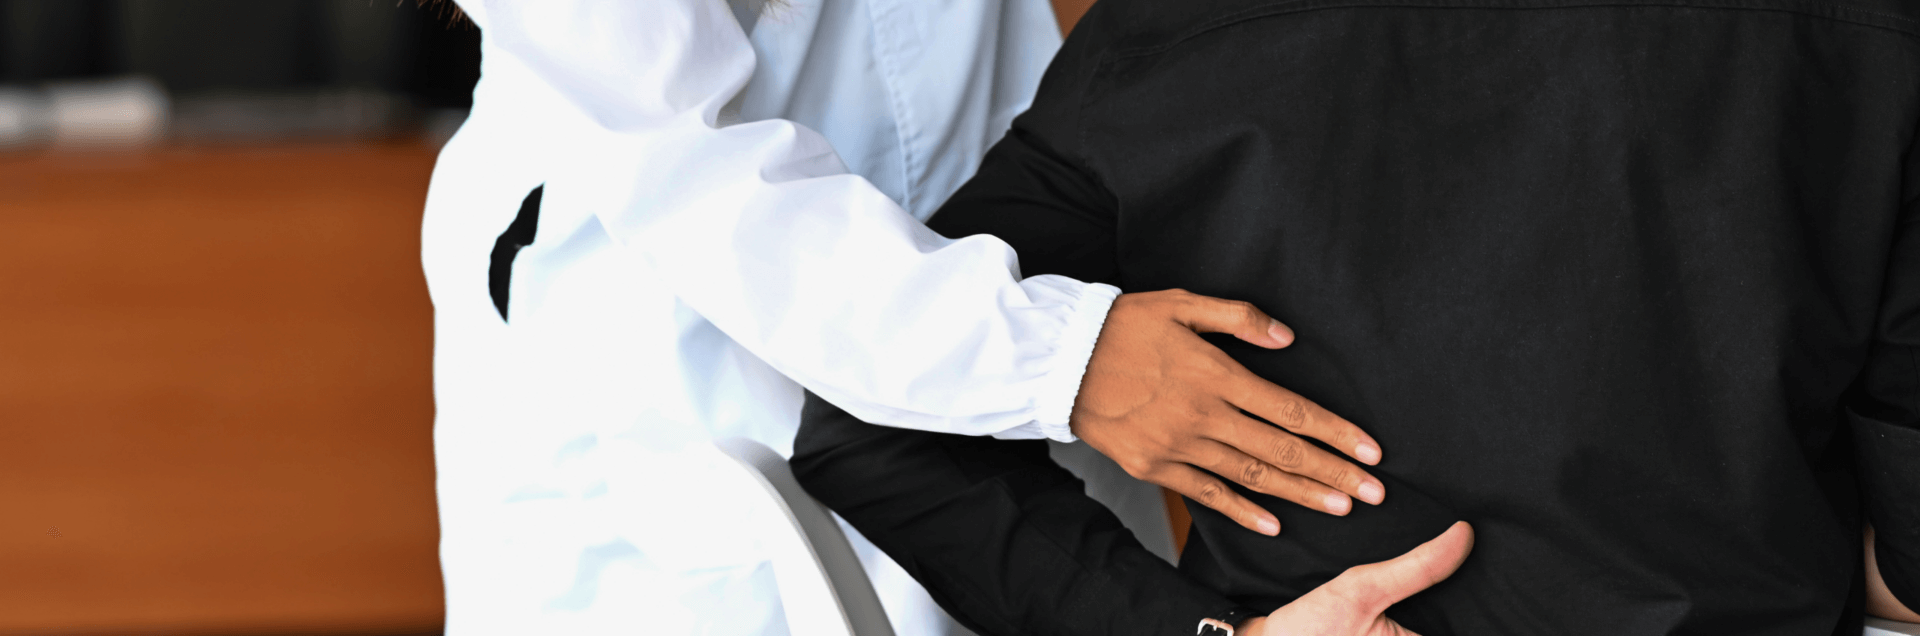 treating back pain with TCM - doctor treating man for back pain